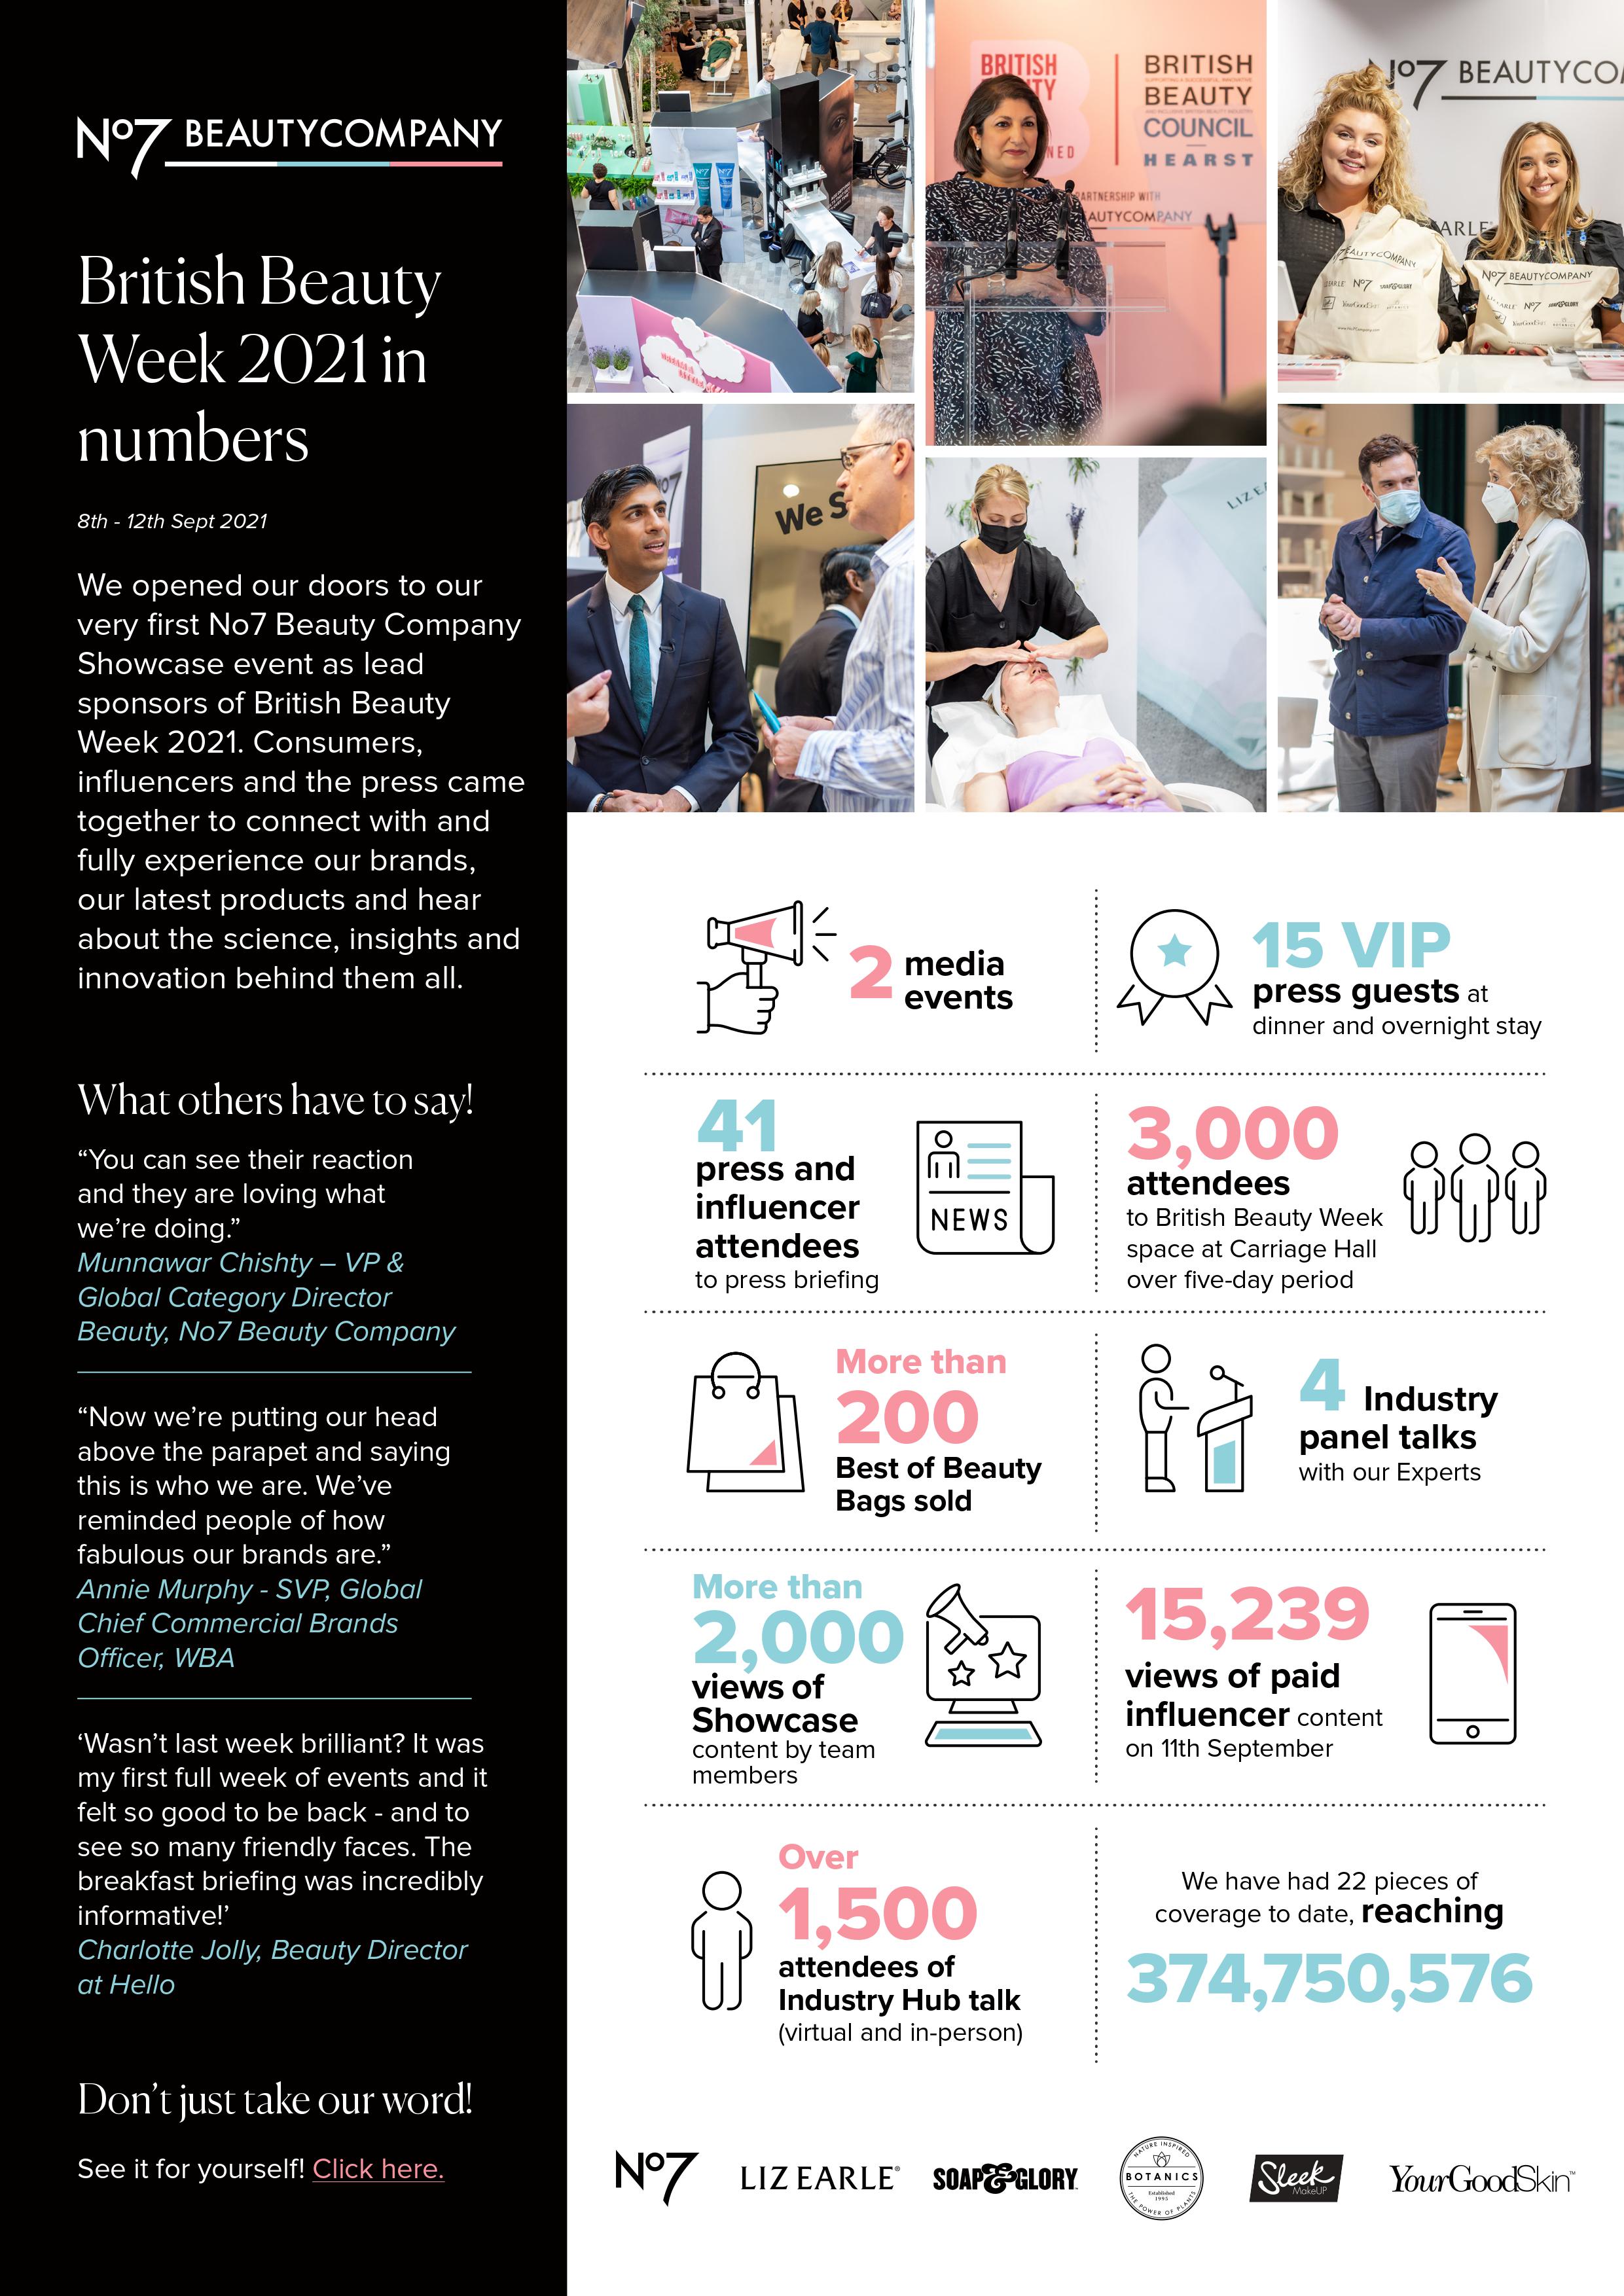 Infographic showing images and statics from British Beauty Week